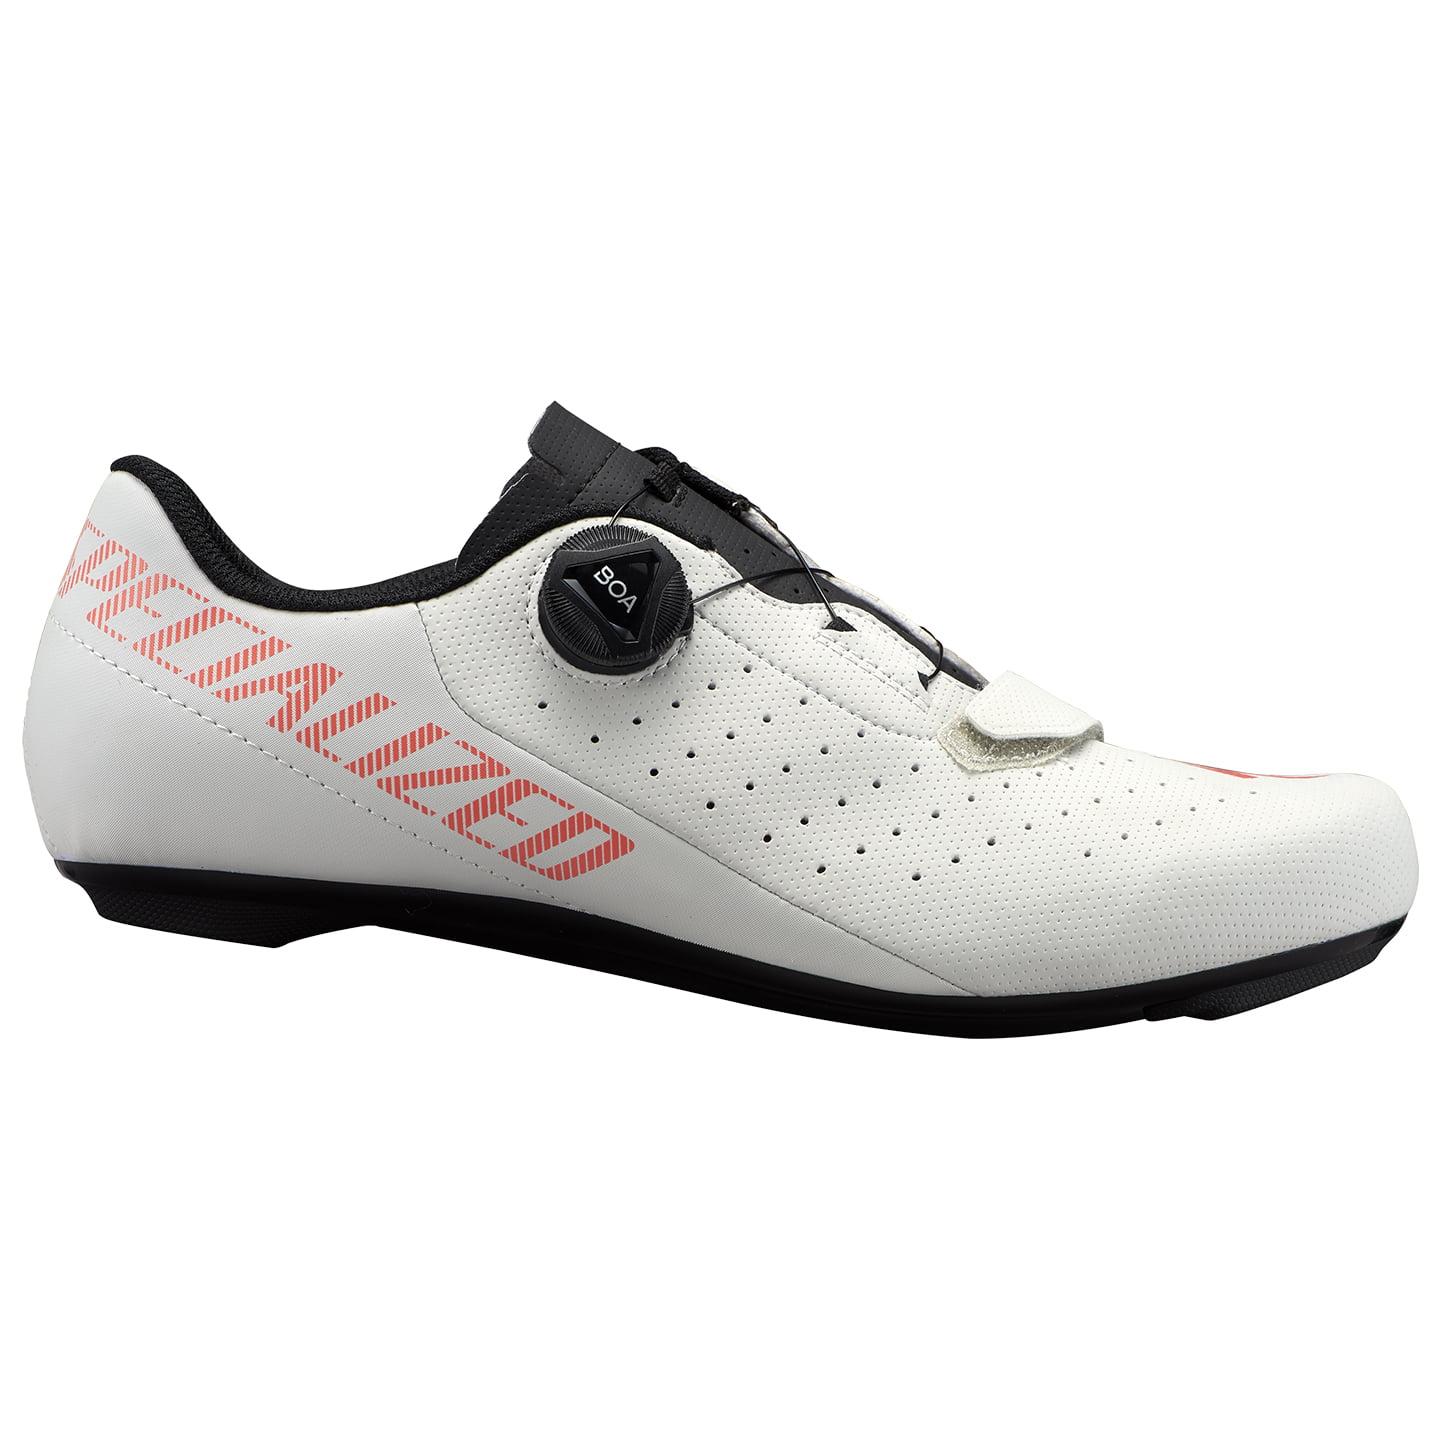 SPECIALIZED Torch 1.0 Road Bike Shoes Road Shoes, for men, size 43, Cycling shoes